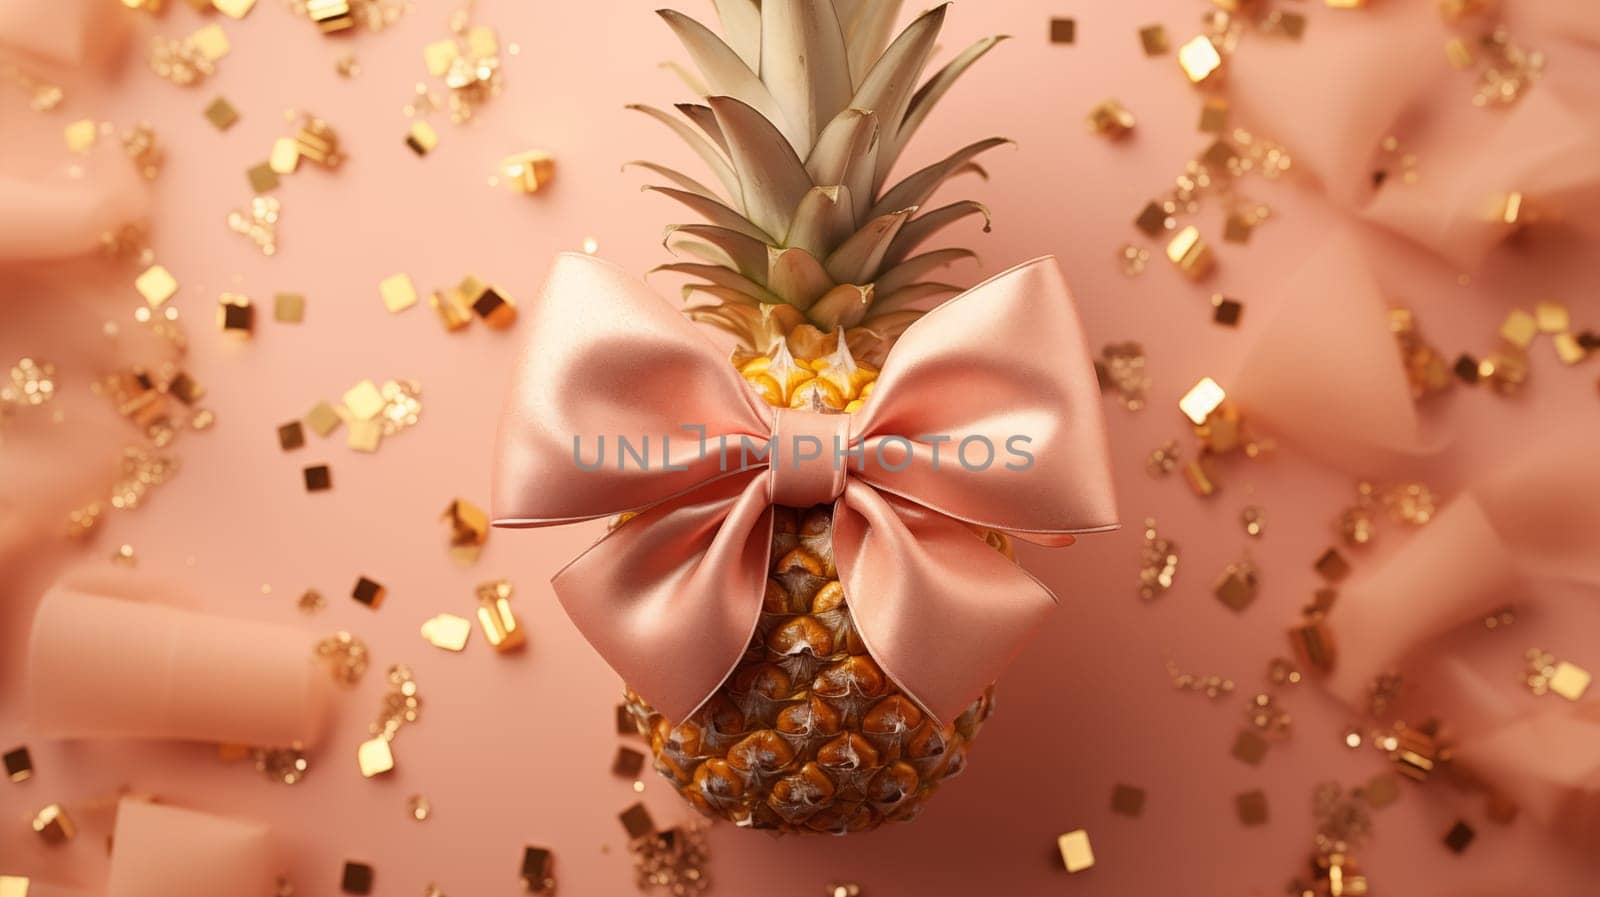 A pineapple with a pink bow lies on a peach-colored background, and golden confetti is scattered nearby by Zakharova